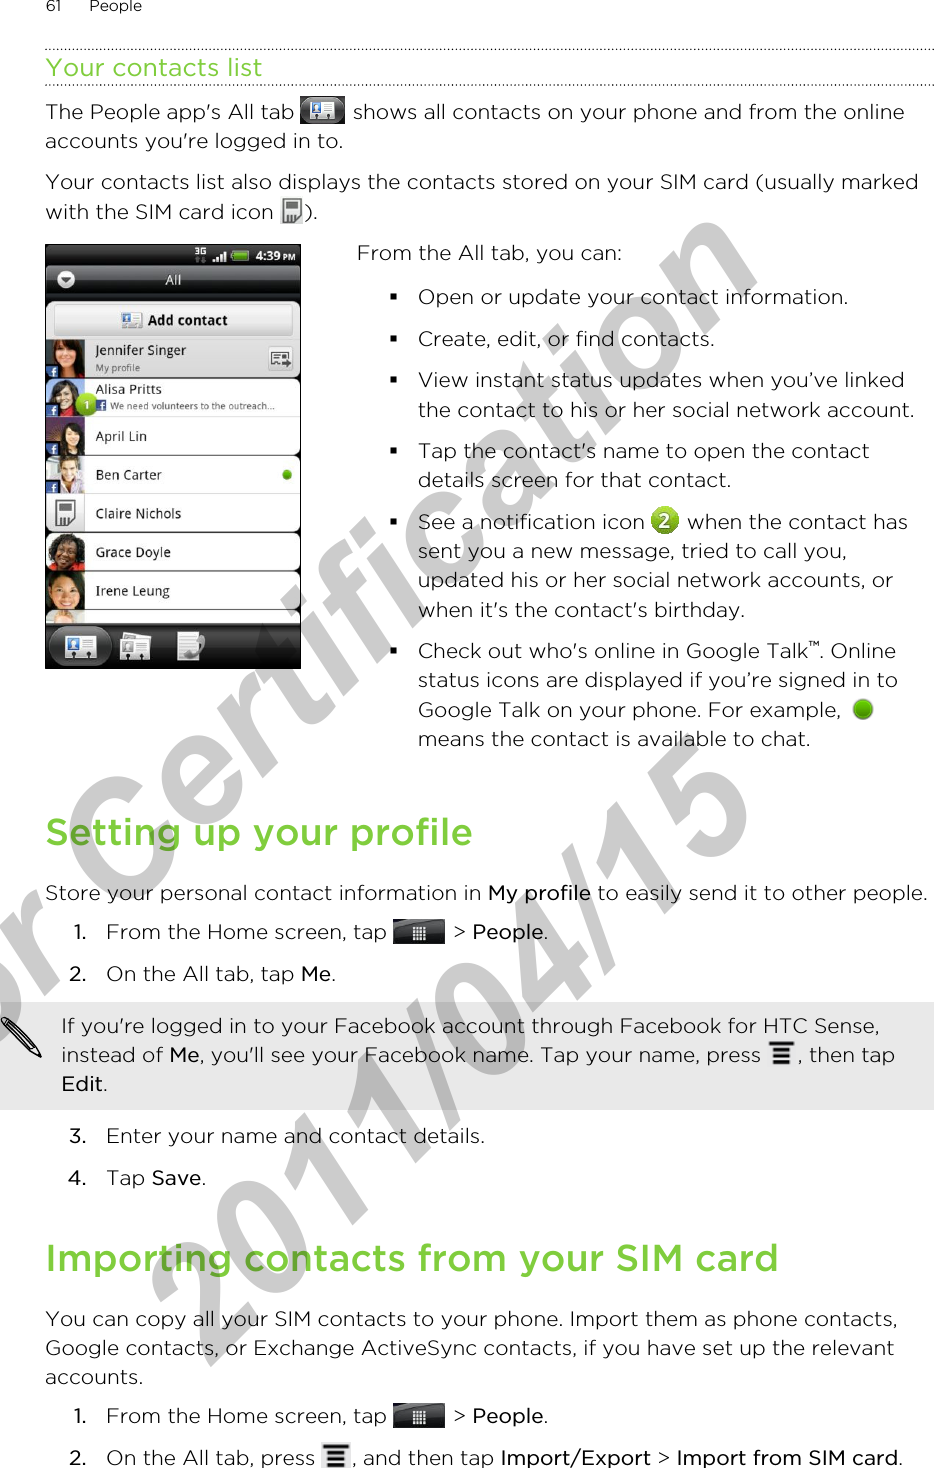 Your contacts listThe People app&apos;s All tab   shows all contacts on your phone and from the onlineaccounts you&apos;re logged in to.Your contacts list also displays the contacts stored on your SIM card (usually markedwith the SIM card icon  ).From the All tab, you can:§Open or update your contact information.§Create, edit, or find contacts.§View instant status updates when you’ve linkedthe contact to his or her social network account.§Tap the contact&apos;s name to open the contactdetails screen for that contact.§See a notification icon   when the contact hassent you a new message, tried to call you,updated his or her social network accounts, orwhen it&apos;s the contact&apos;s birthday.§Check out who&apos;s online in Google Talk™. Onlinestatus icons are displayed if you’re signed in toGoogle Talk on your phone. For example, means the contact is available to chat.Setting up your profileStore your personal contact information in My profile to easily send it to other people.1. From the Home screen, tap   &gt; People.2. On the All tab, tap Me. If you&apos;re logged in to your Facebook account through Facebook for HTC Sense,instead of Me, you&apos;ll see your Facebook name. Tap your name, press  , then tapEdit.3. Enter your name and contact details.4. Tap Save.Importing contacts from your SIM cardYou can copy all your SIM contacts to your phone. Import them as phone contacts,Google contacts, or Exchange ActiveSync contacts, if you have set up the relevantaccounts.1. From the Home screen, tap   &gt; People.2. On the All tab, press  , and then tap Import/Export &gt; Import from SIM card.61 Peoplefor Certification  2011/04/15